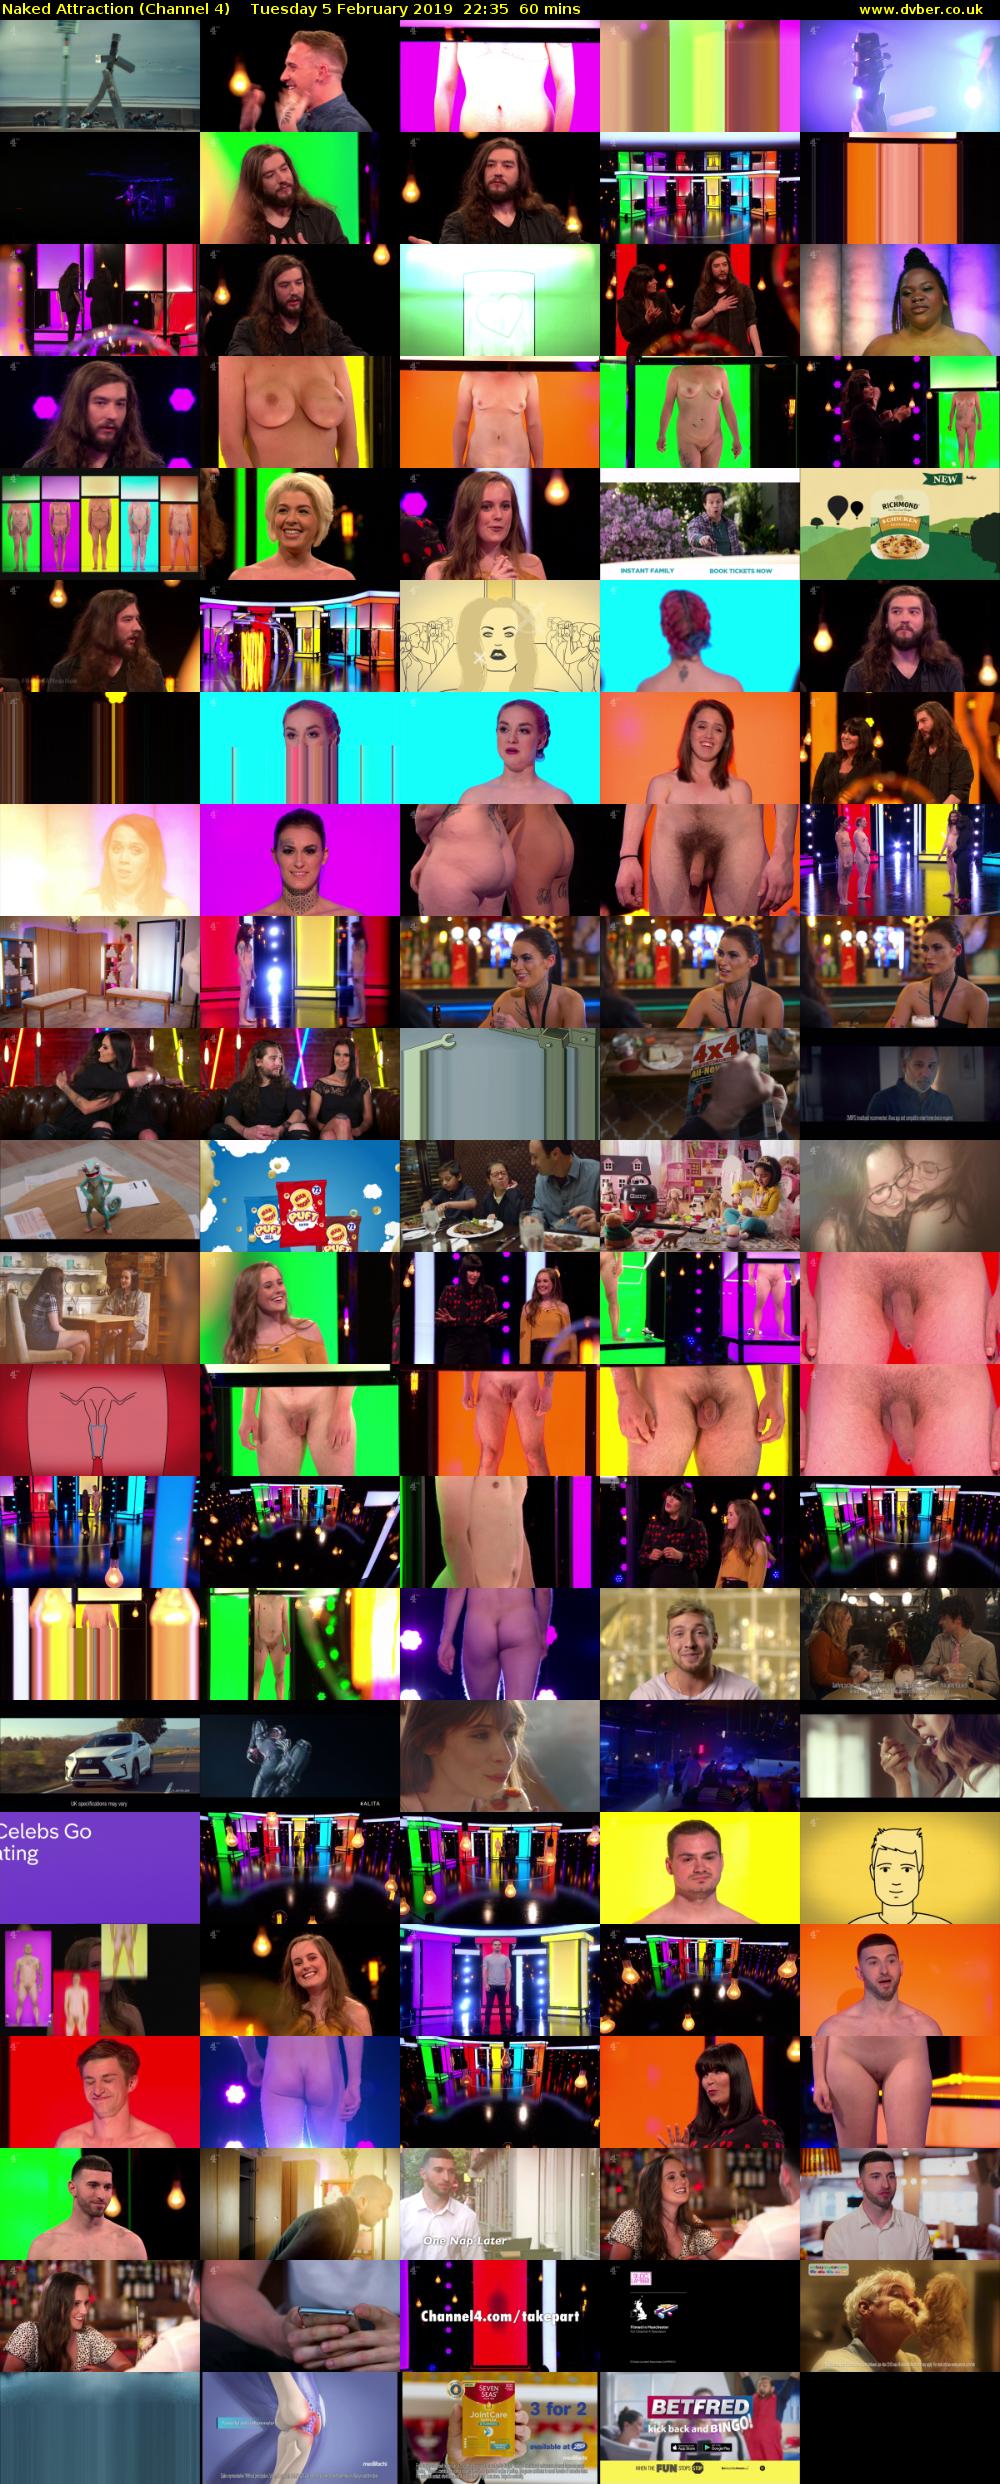 Naked Attraction (Channel 4) Tuesday 5 February 2019 22:35 - 23:35